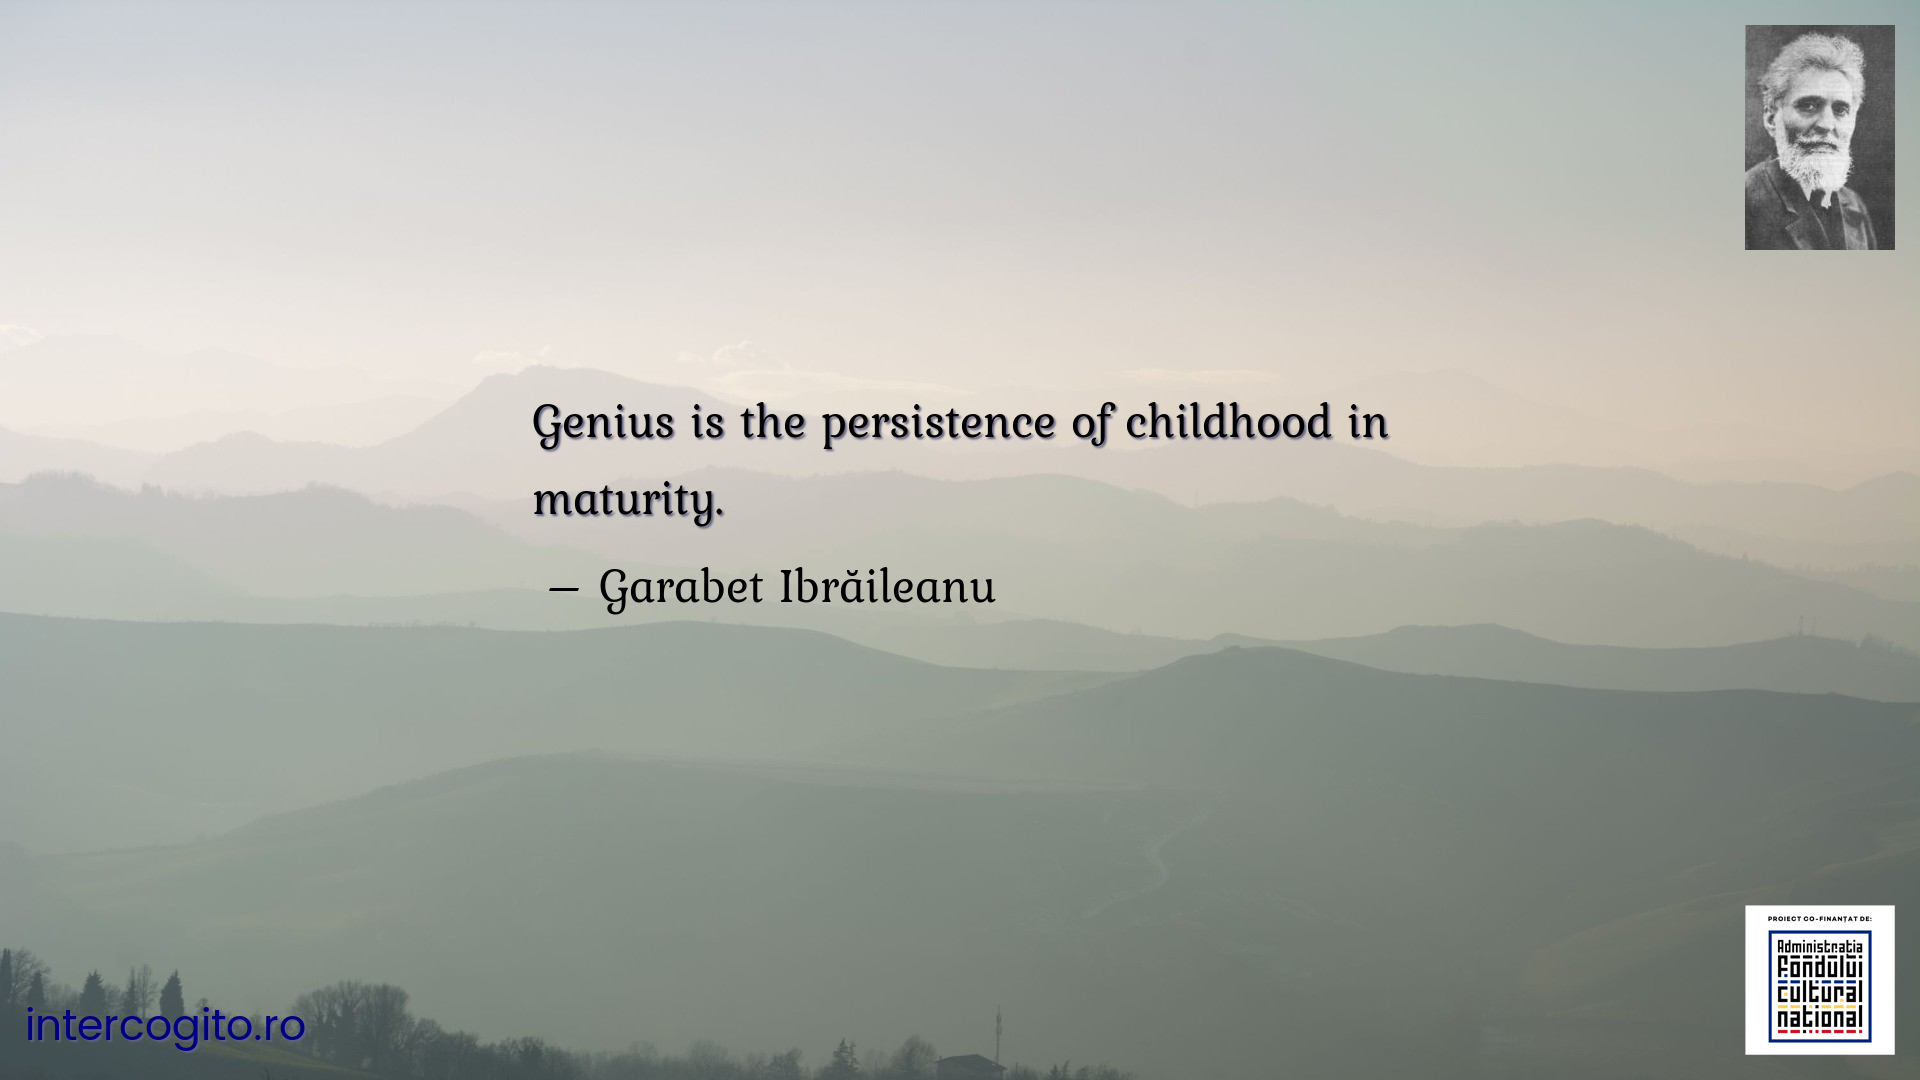 Genius is the persistence of childhood in maturity.